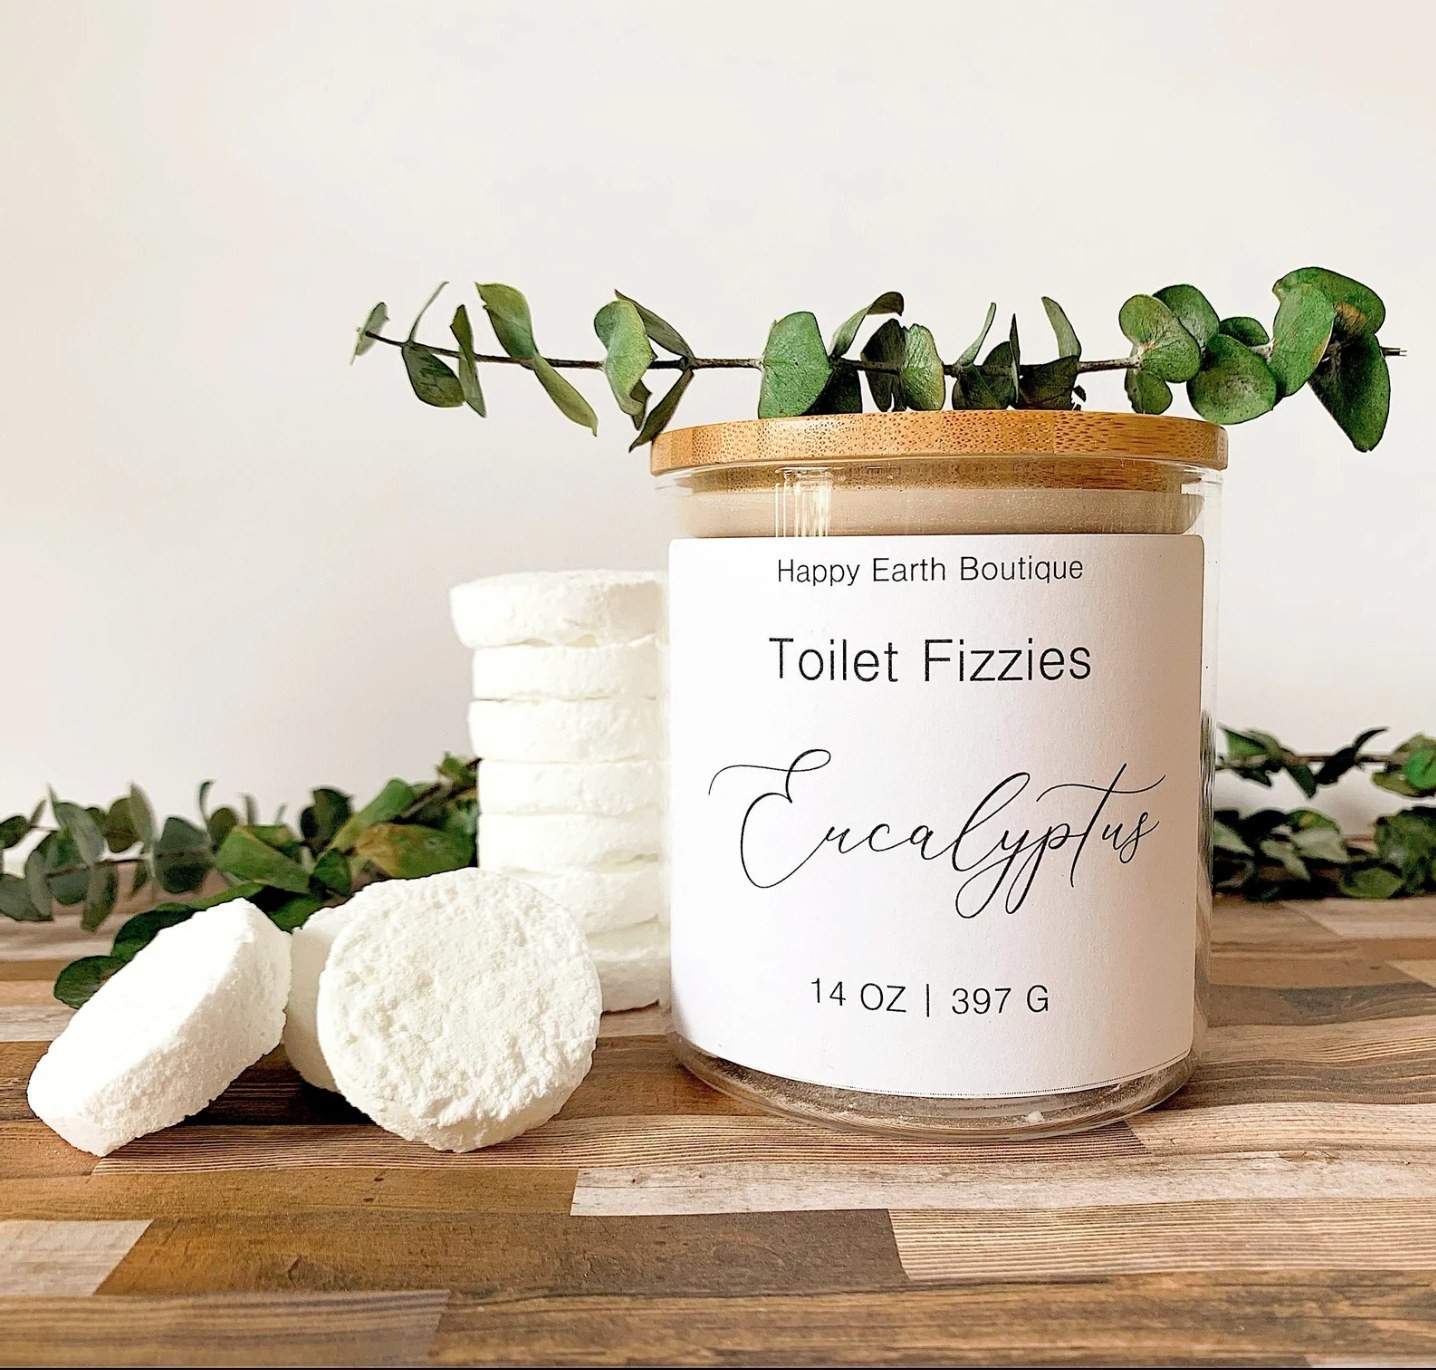 the white jar of toilet fizzies, next to several of the white tablets, on a wood surface with eucalyptus branches